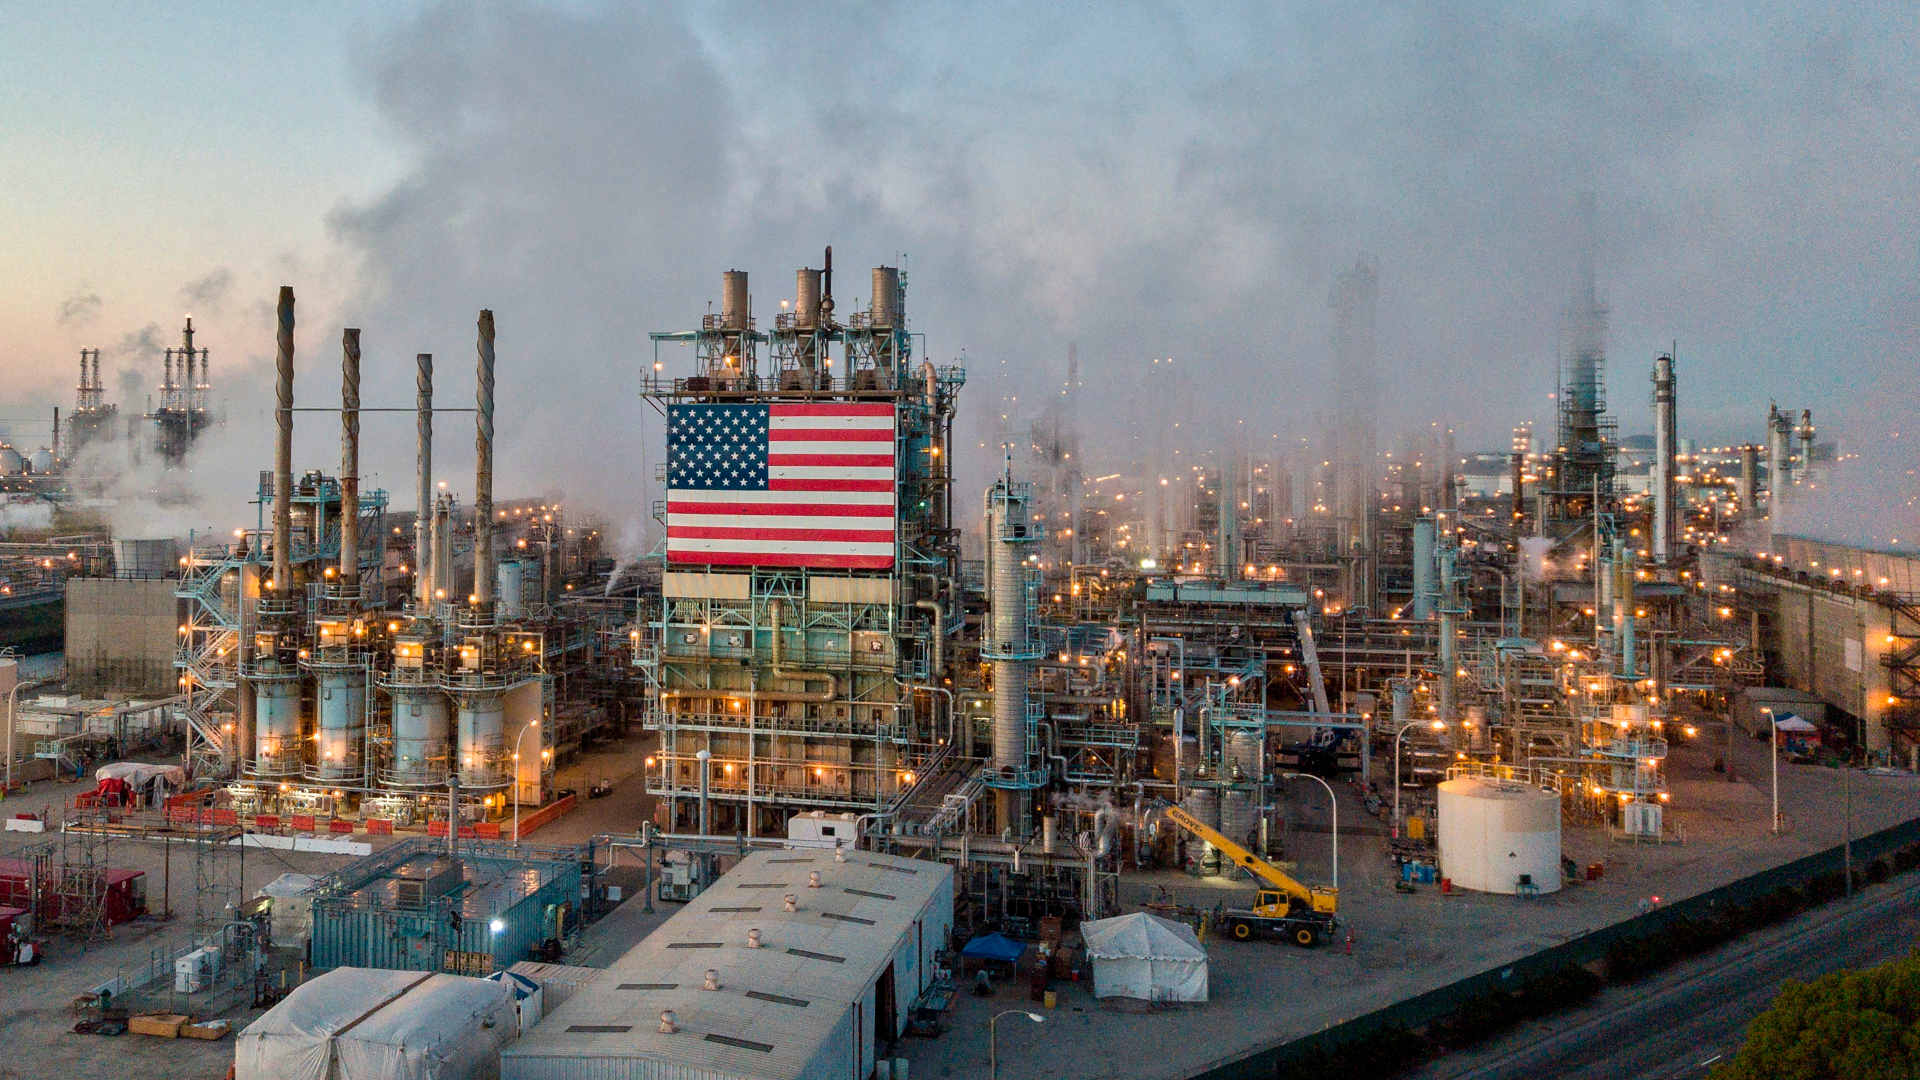 The Marathon Petroleum Corp's Los Angeles Refinery in Carson, California after the price for crude plunged into negative territory for the first time in history in April 2020.